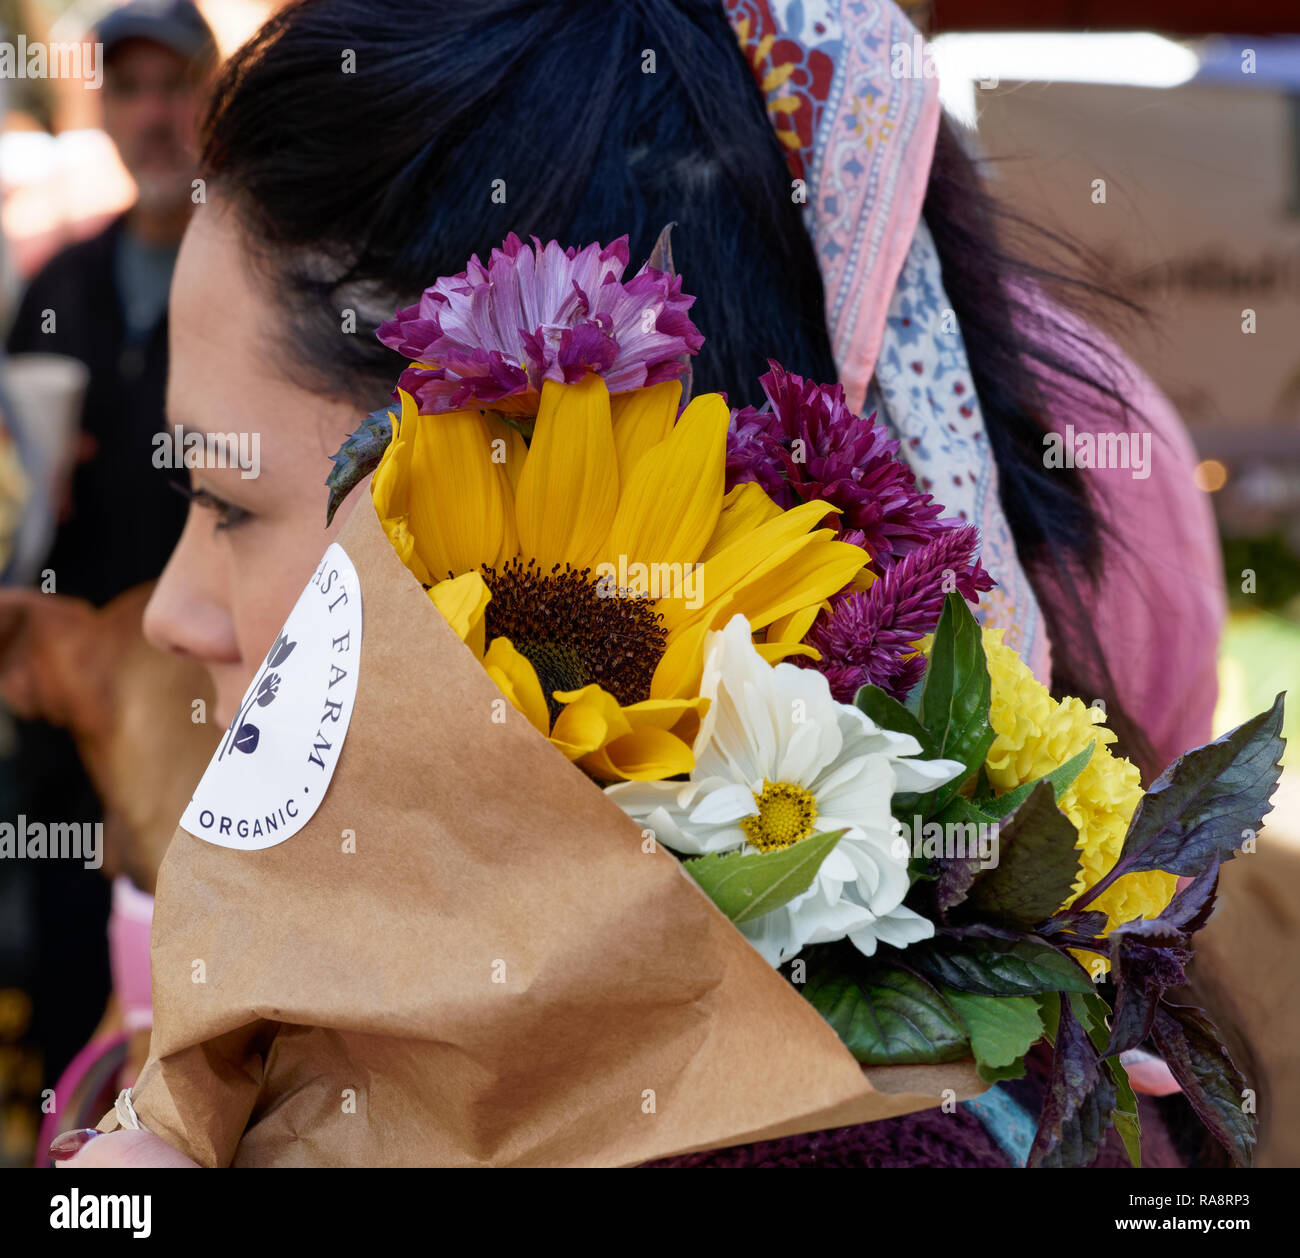 Phoenix, AZ - November 17, 2018 Beautiful fresh flowers are for sale at the Saturday morning Open Air market at Central Ave. Stock Photo